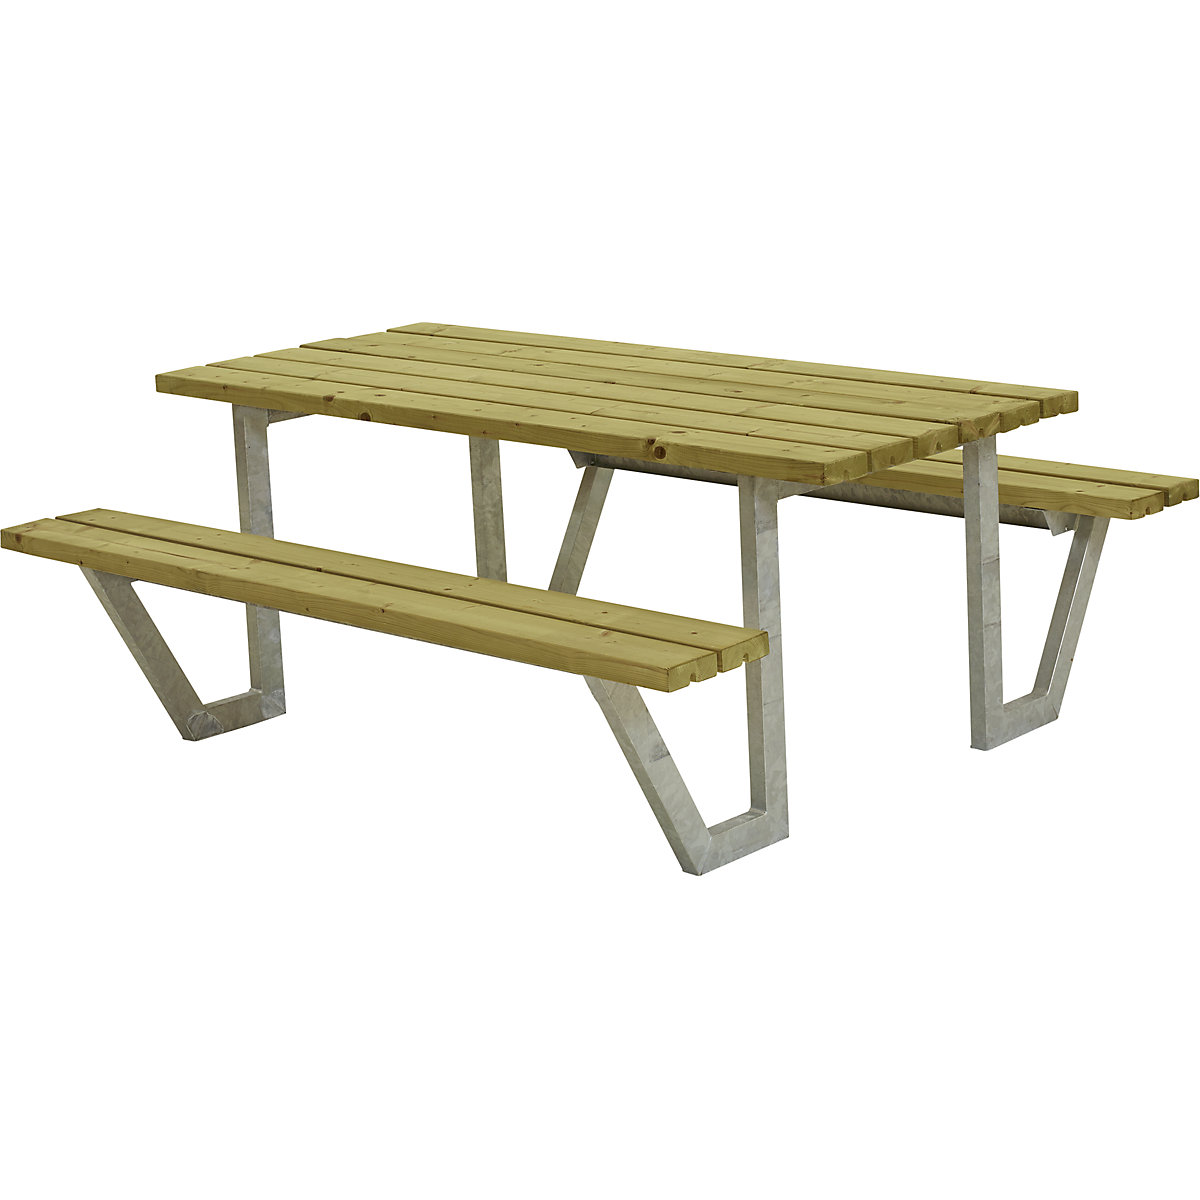 Picnic bench for 6 people